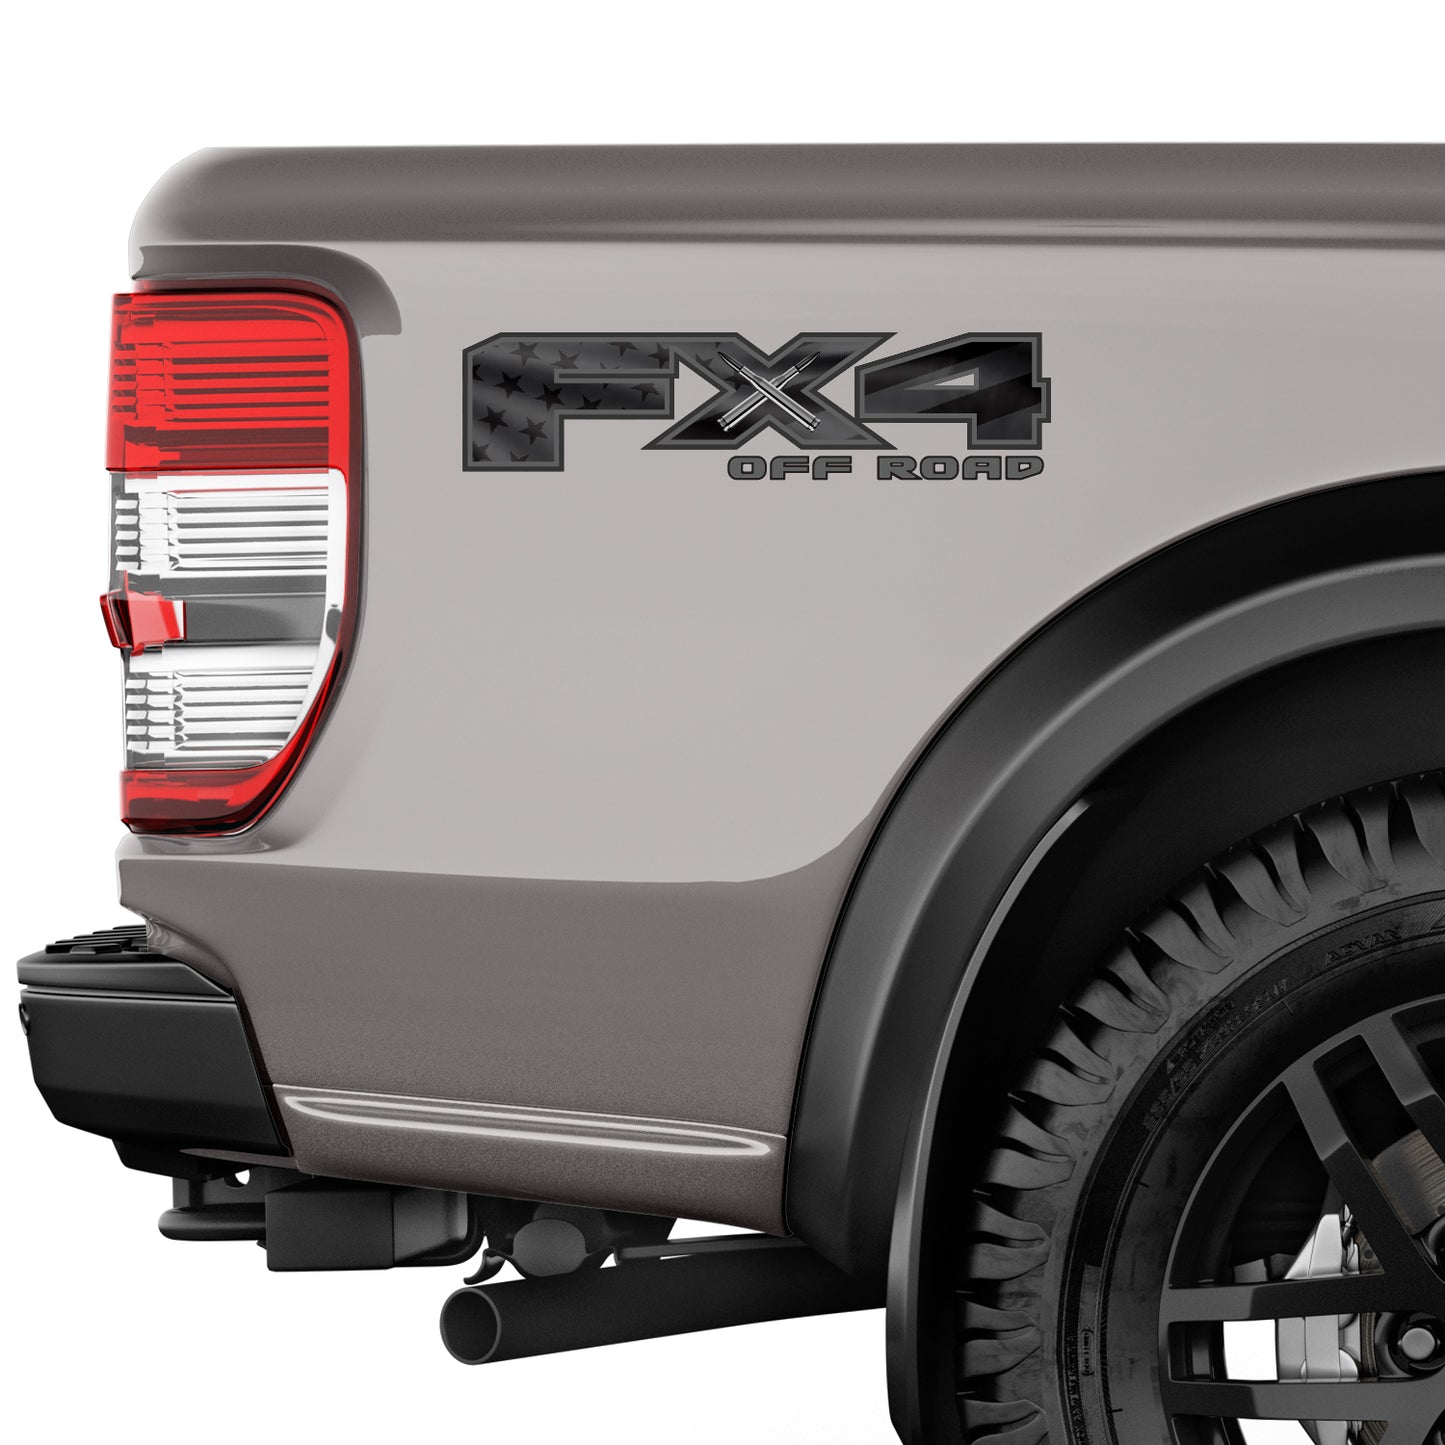 FX4 Off Road Black Flag Decal Replacement Sticker Ford F 150 Bedside Emblem for 4x4 Truck Super Duty